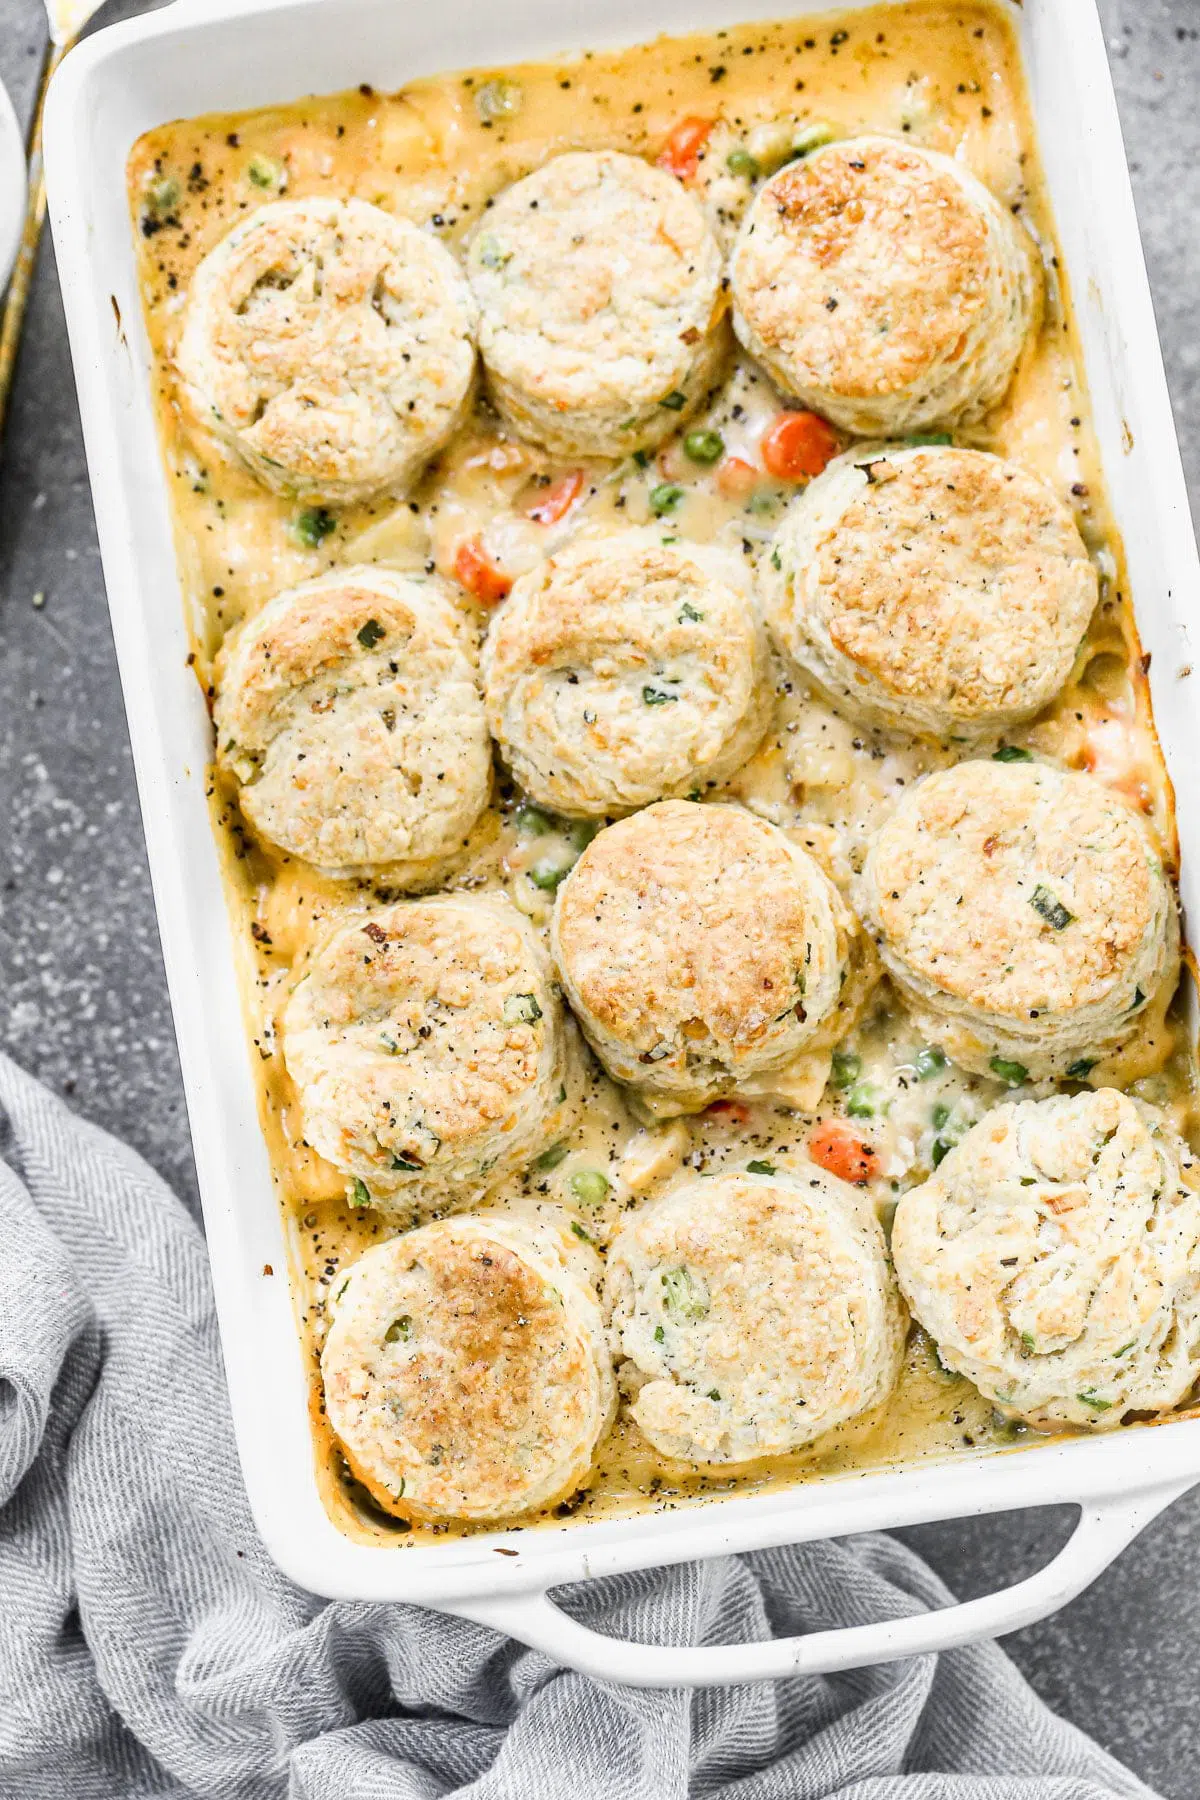 Possibly our favorite comfort food of fall, this Chicken Pot Pie with Biscuits is cozy, delicious and a such fun twist on traditional chicken pot pie. We take a classic creamy pot pie filling full of chicken, carrots, celery, and potatoes and stud it with sharp cheddar cheese and then top it off with fluffy, tender cheddar chive biscuits. Heaven in a casserole dish.